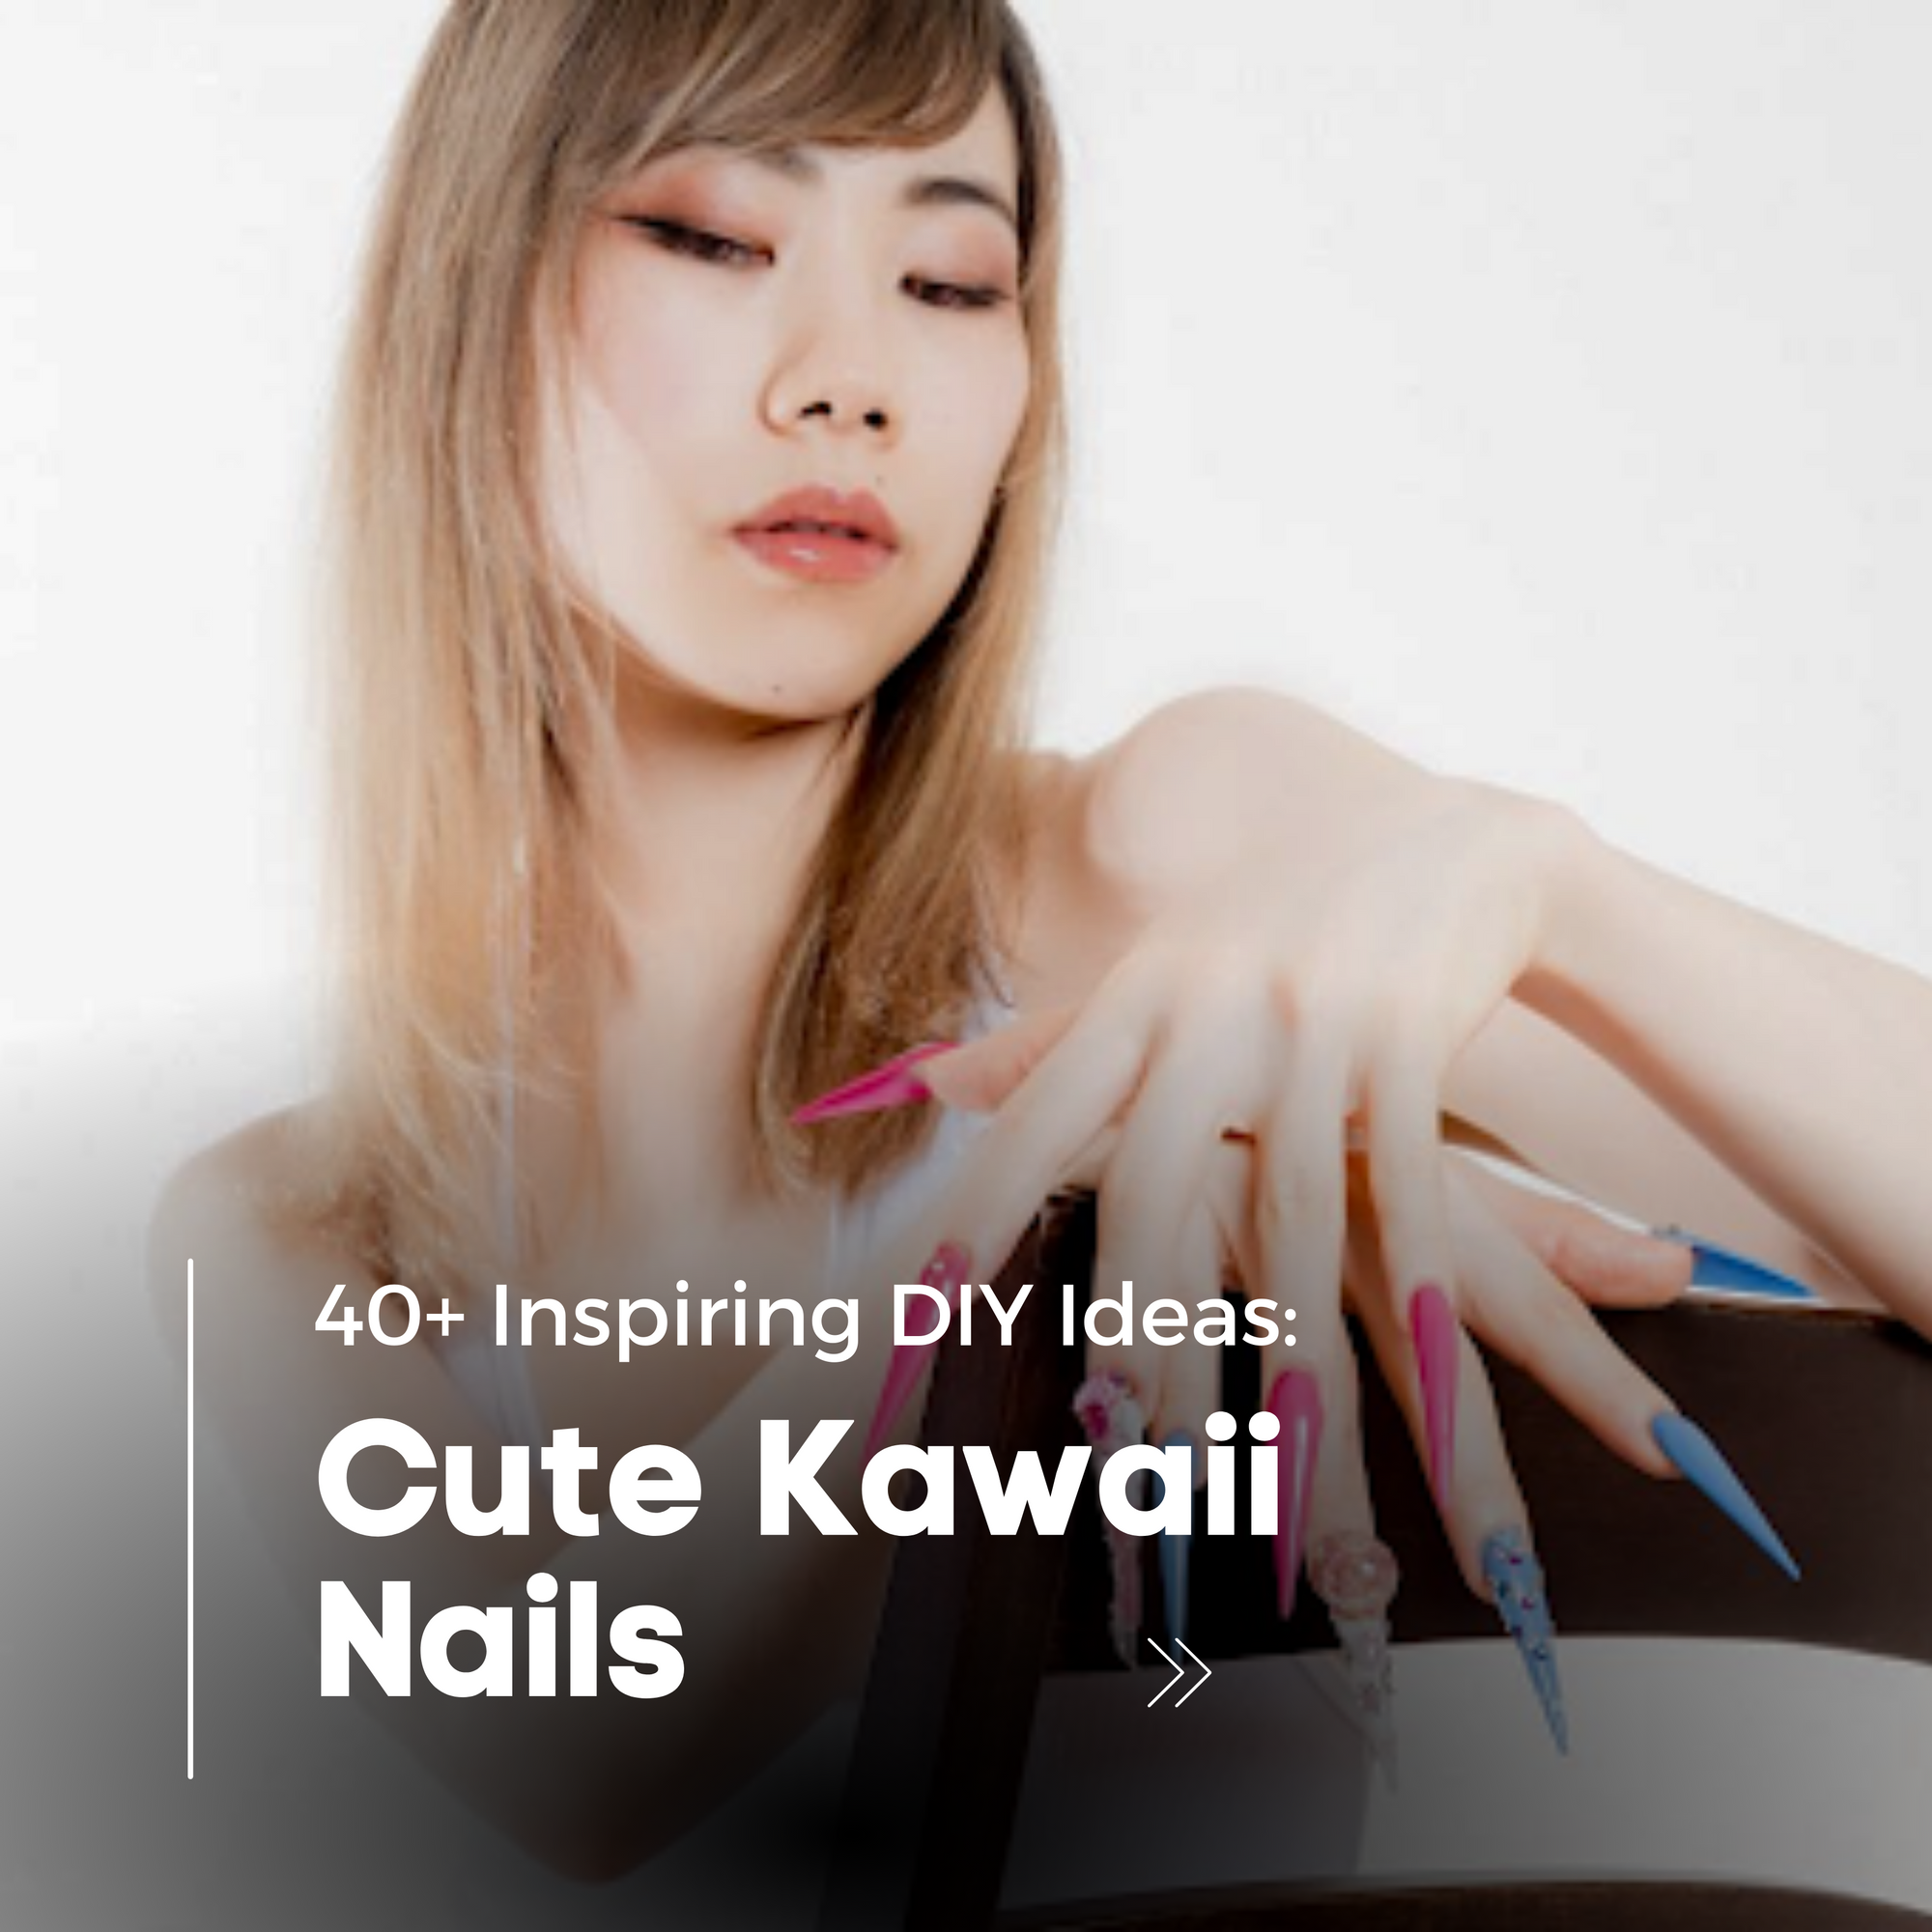 The Complete Guide to Cute Kawaii Nails: Inspiring DIY Ideas You Can Achieve at Home